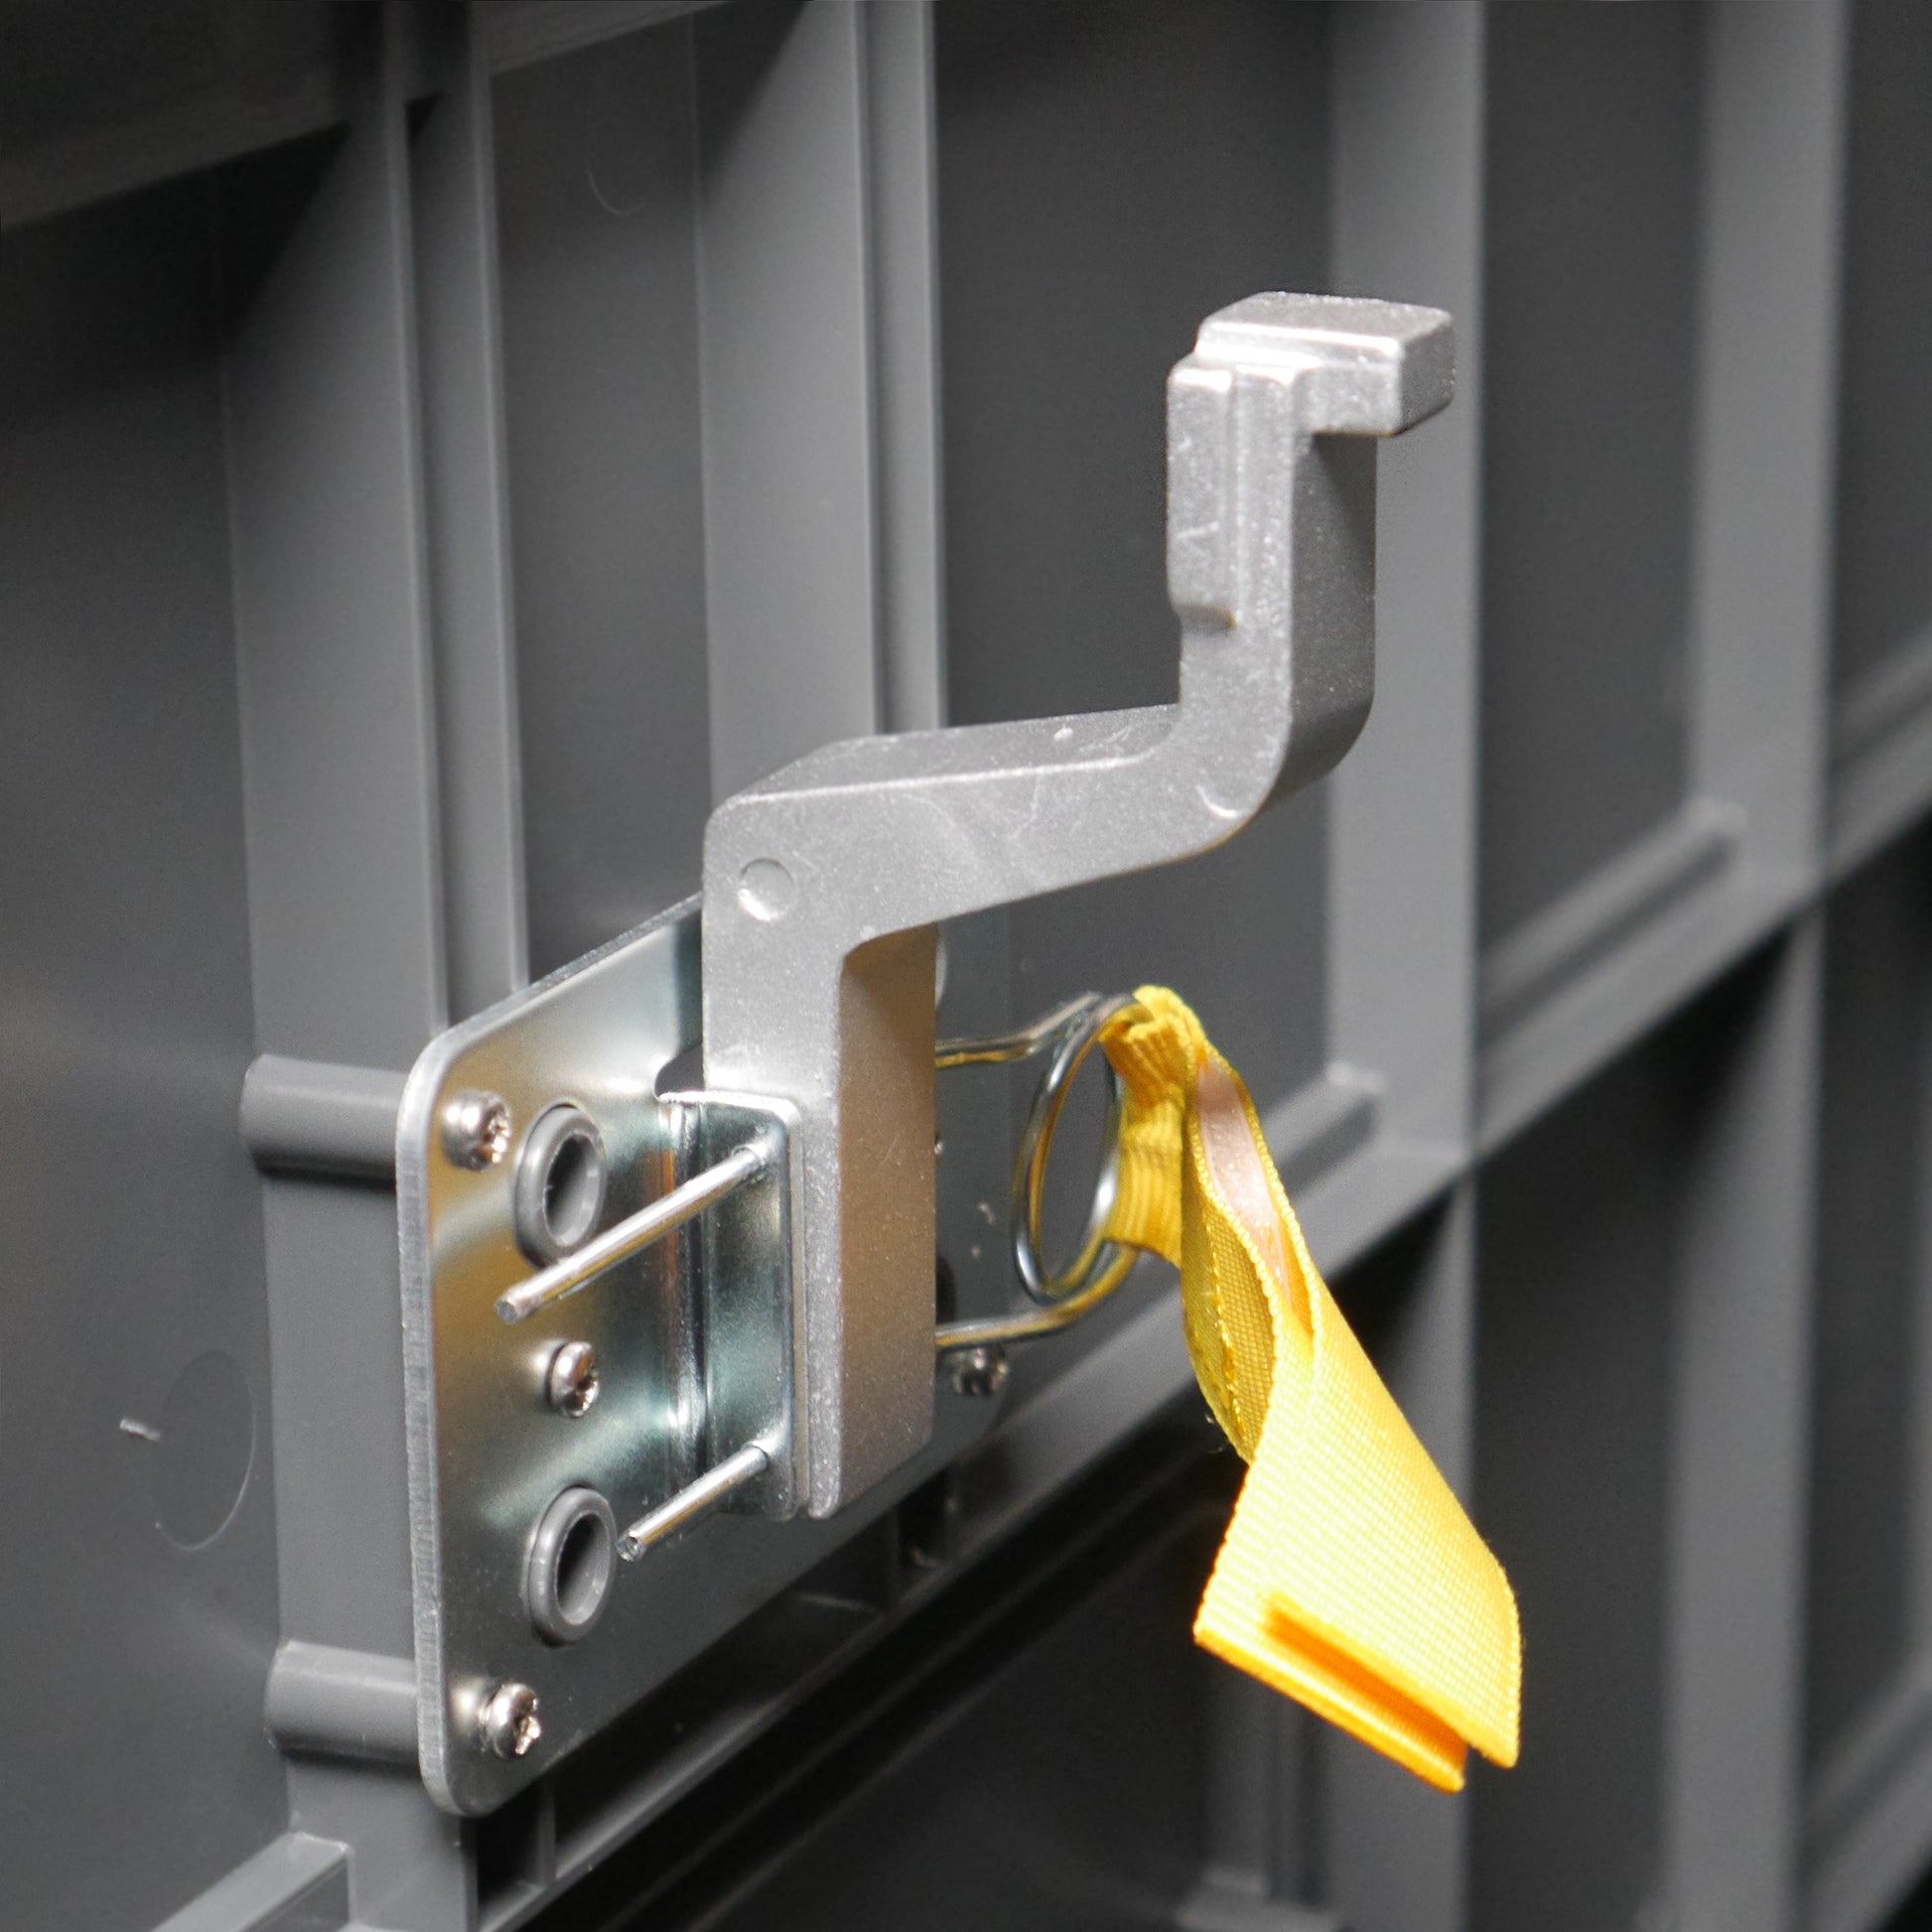 BenchSentry Package Delivery Box_Slate_Locking Mechanism